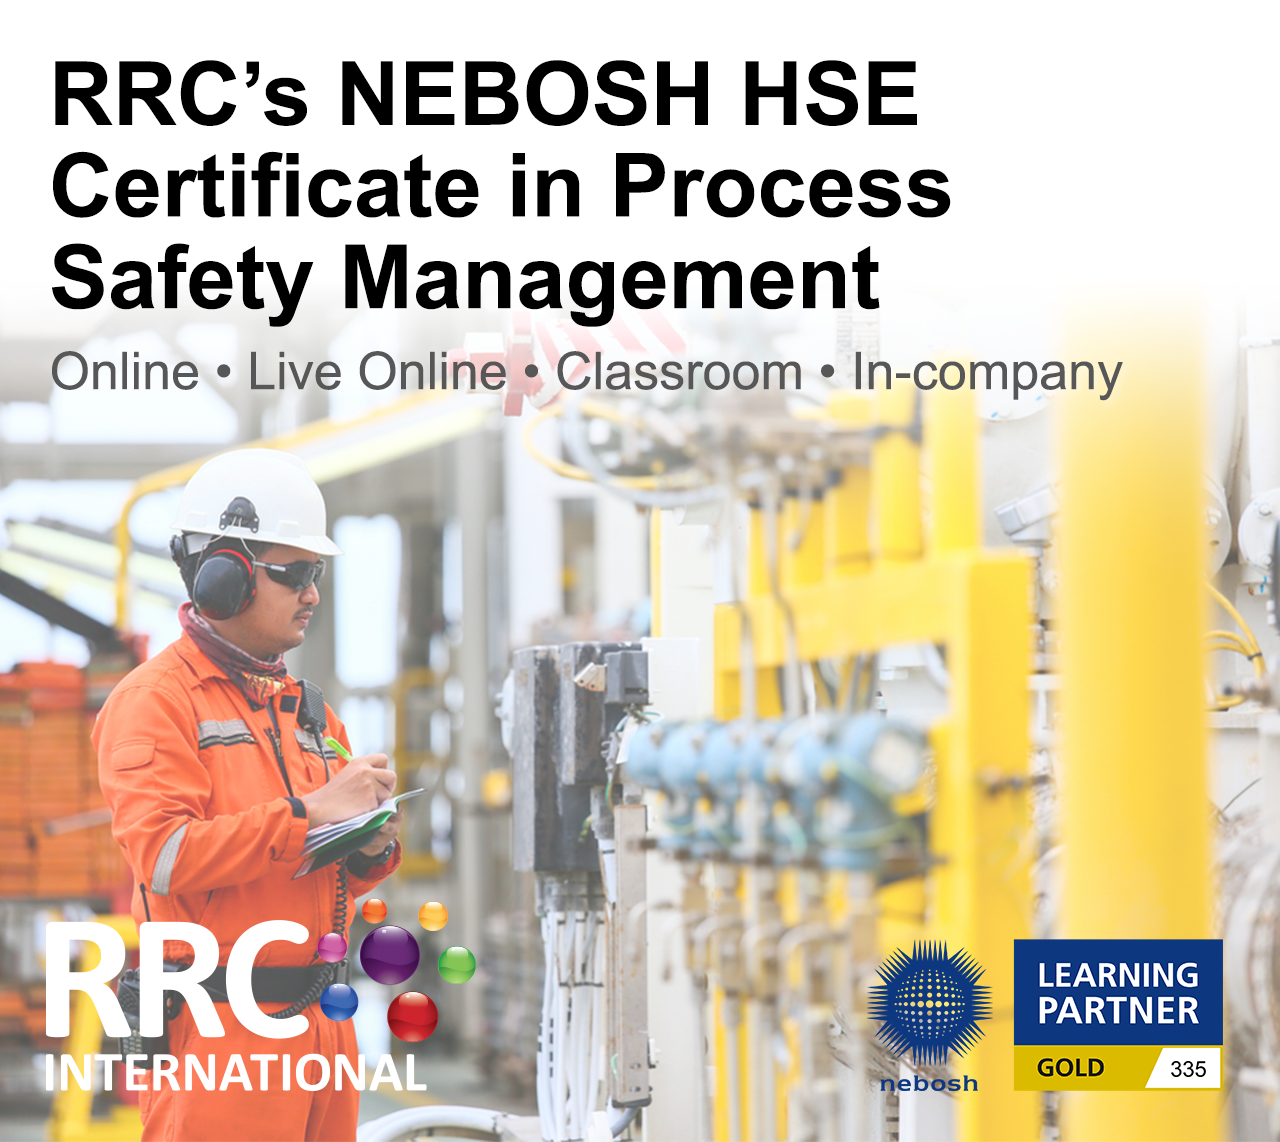 RRC's NEBOSH HSE Certificate in Process Safety Management